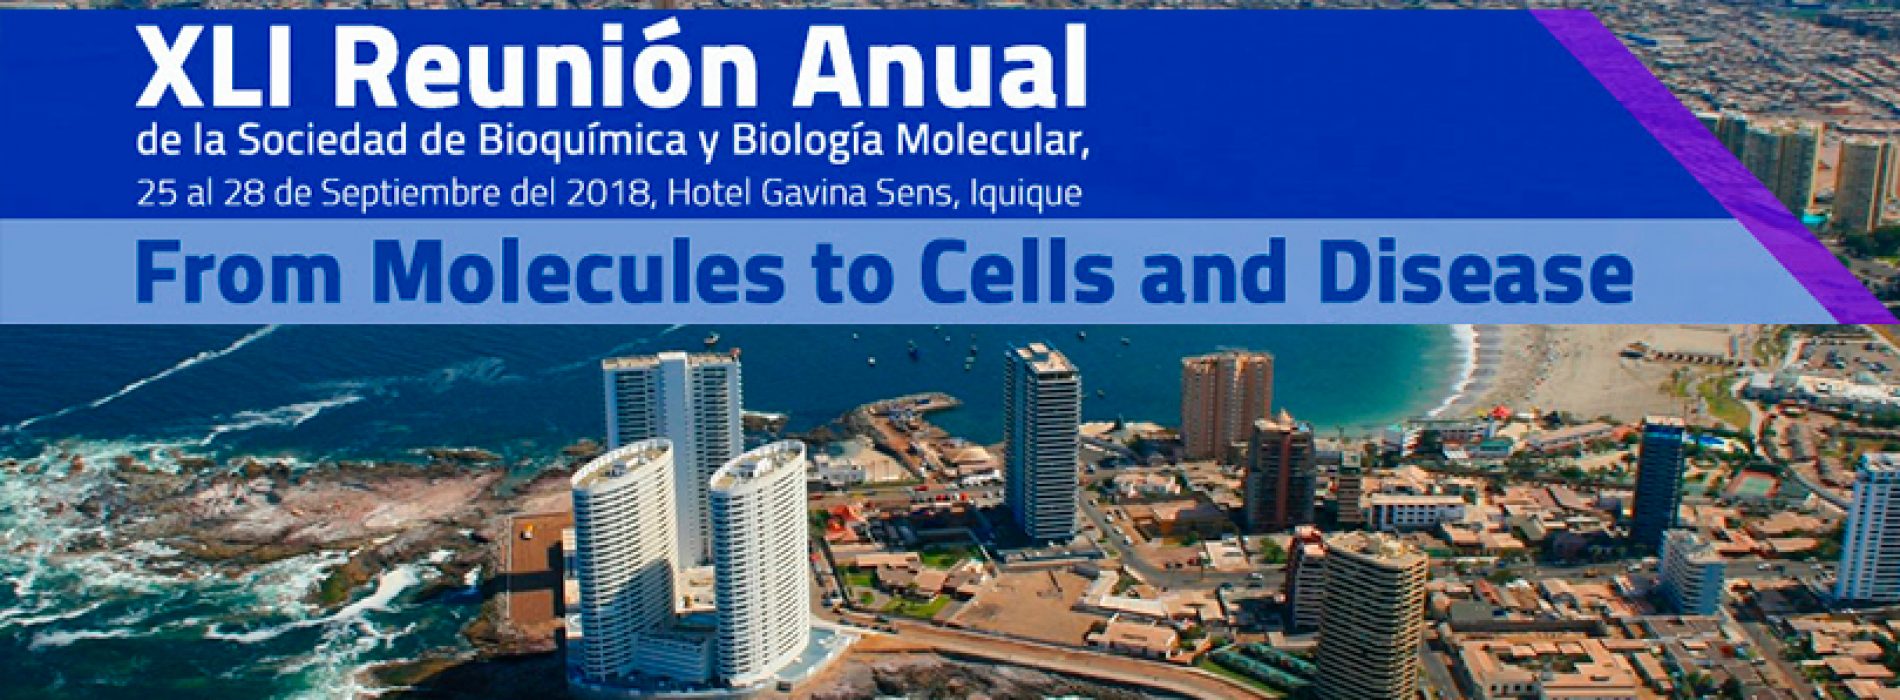 XLI Annual Meeting of the Society of Biochemistry and Molecular Biology, September 25-28, 2018, Hotel Gavina Sens, Iquique